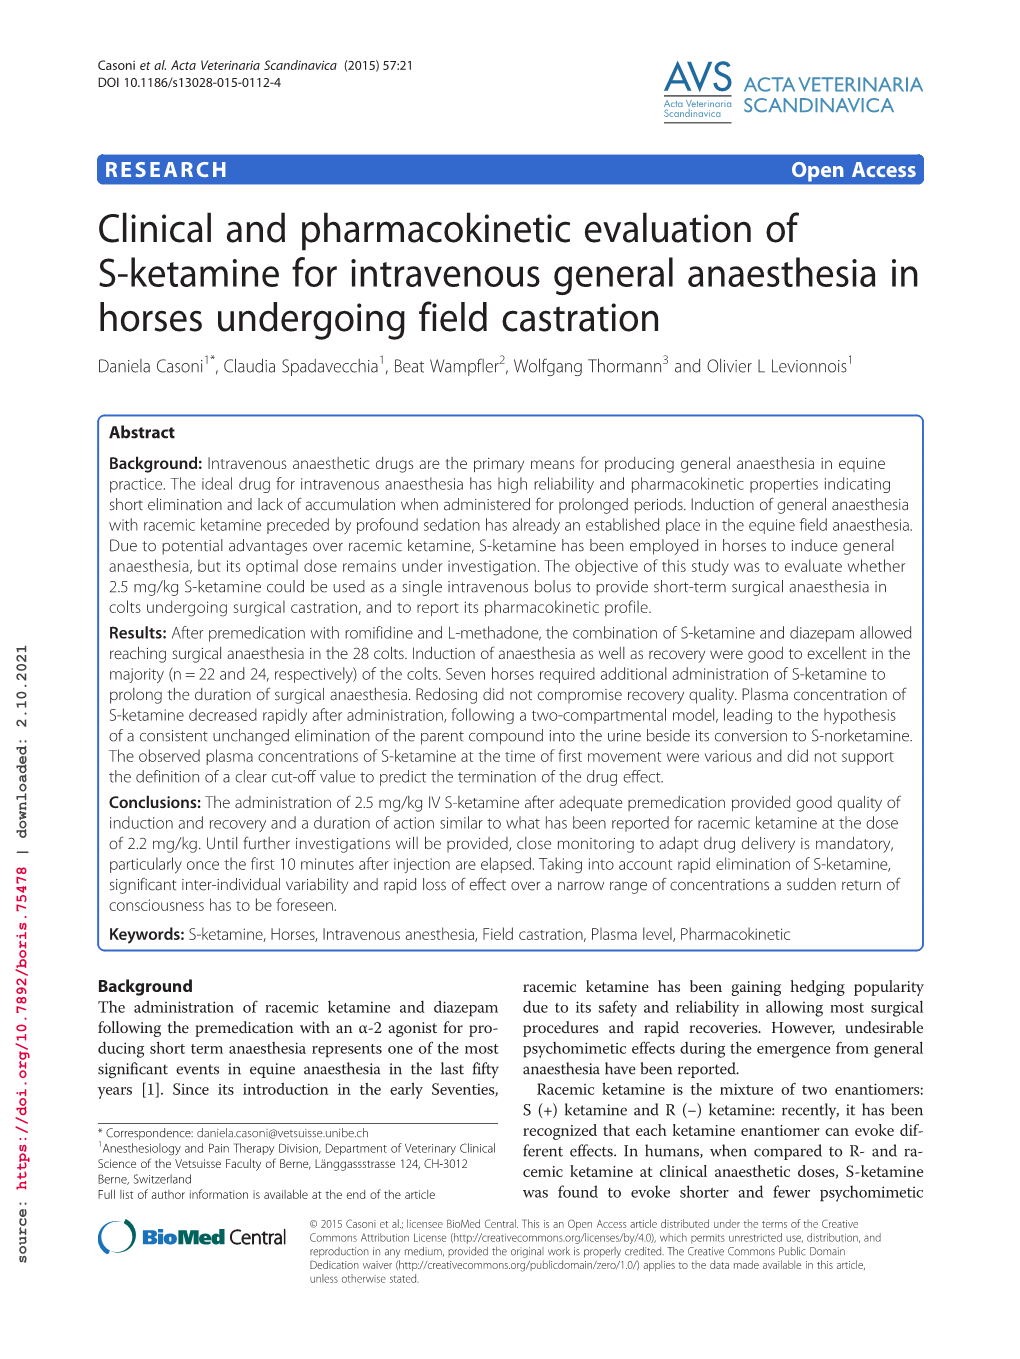 Clinical and Pharmacokinetic Evaluation of S-Ketamine